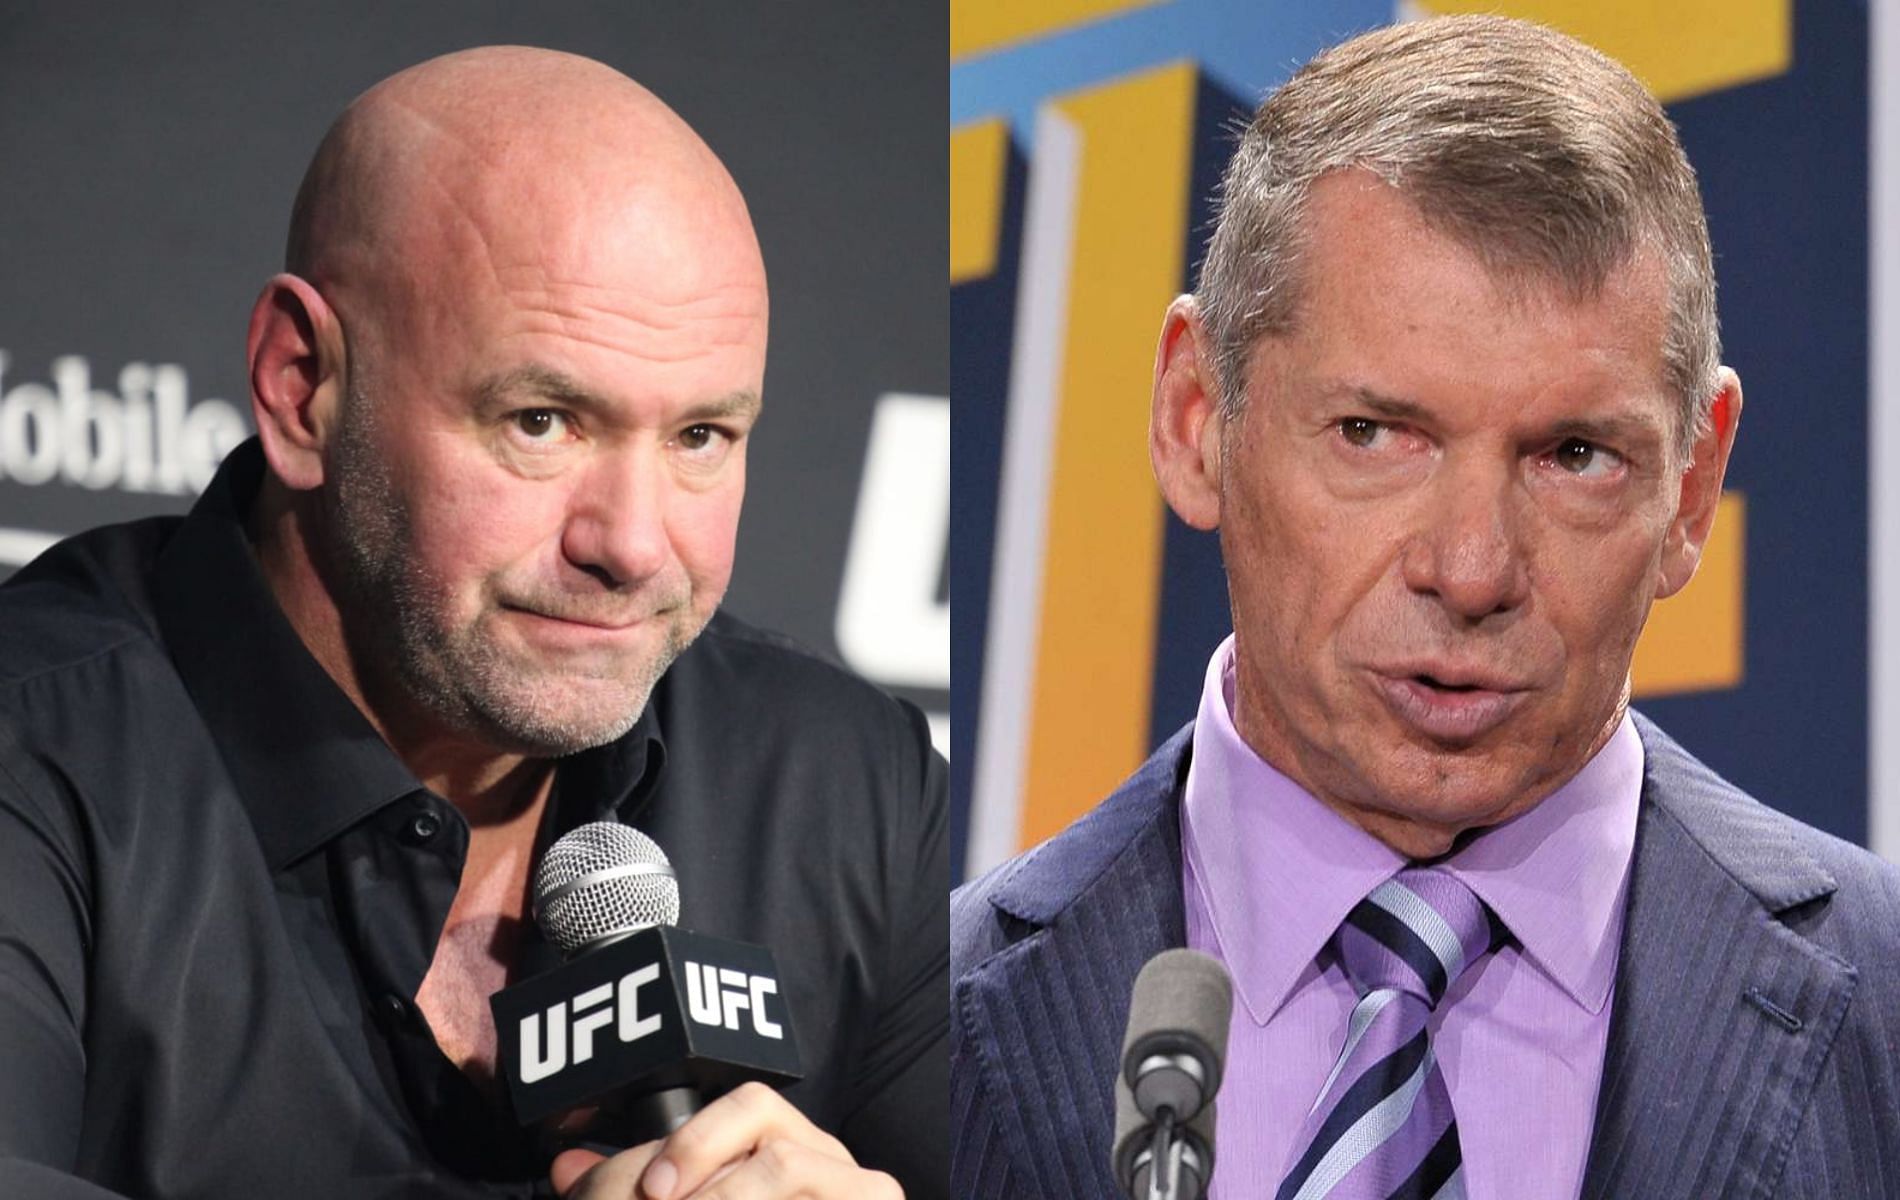 Dana White (left) and Vince McMahon (right)